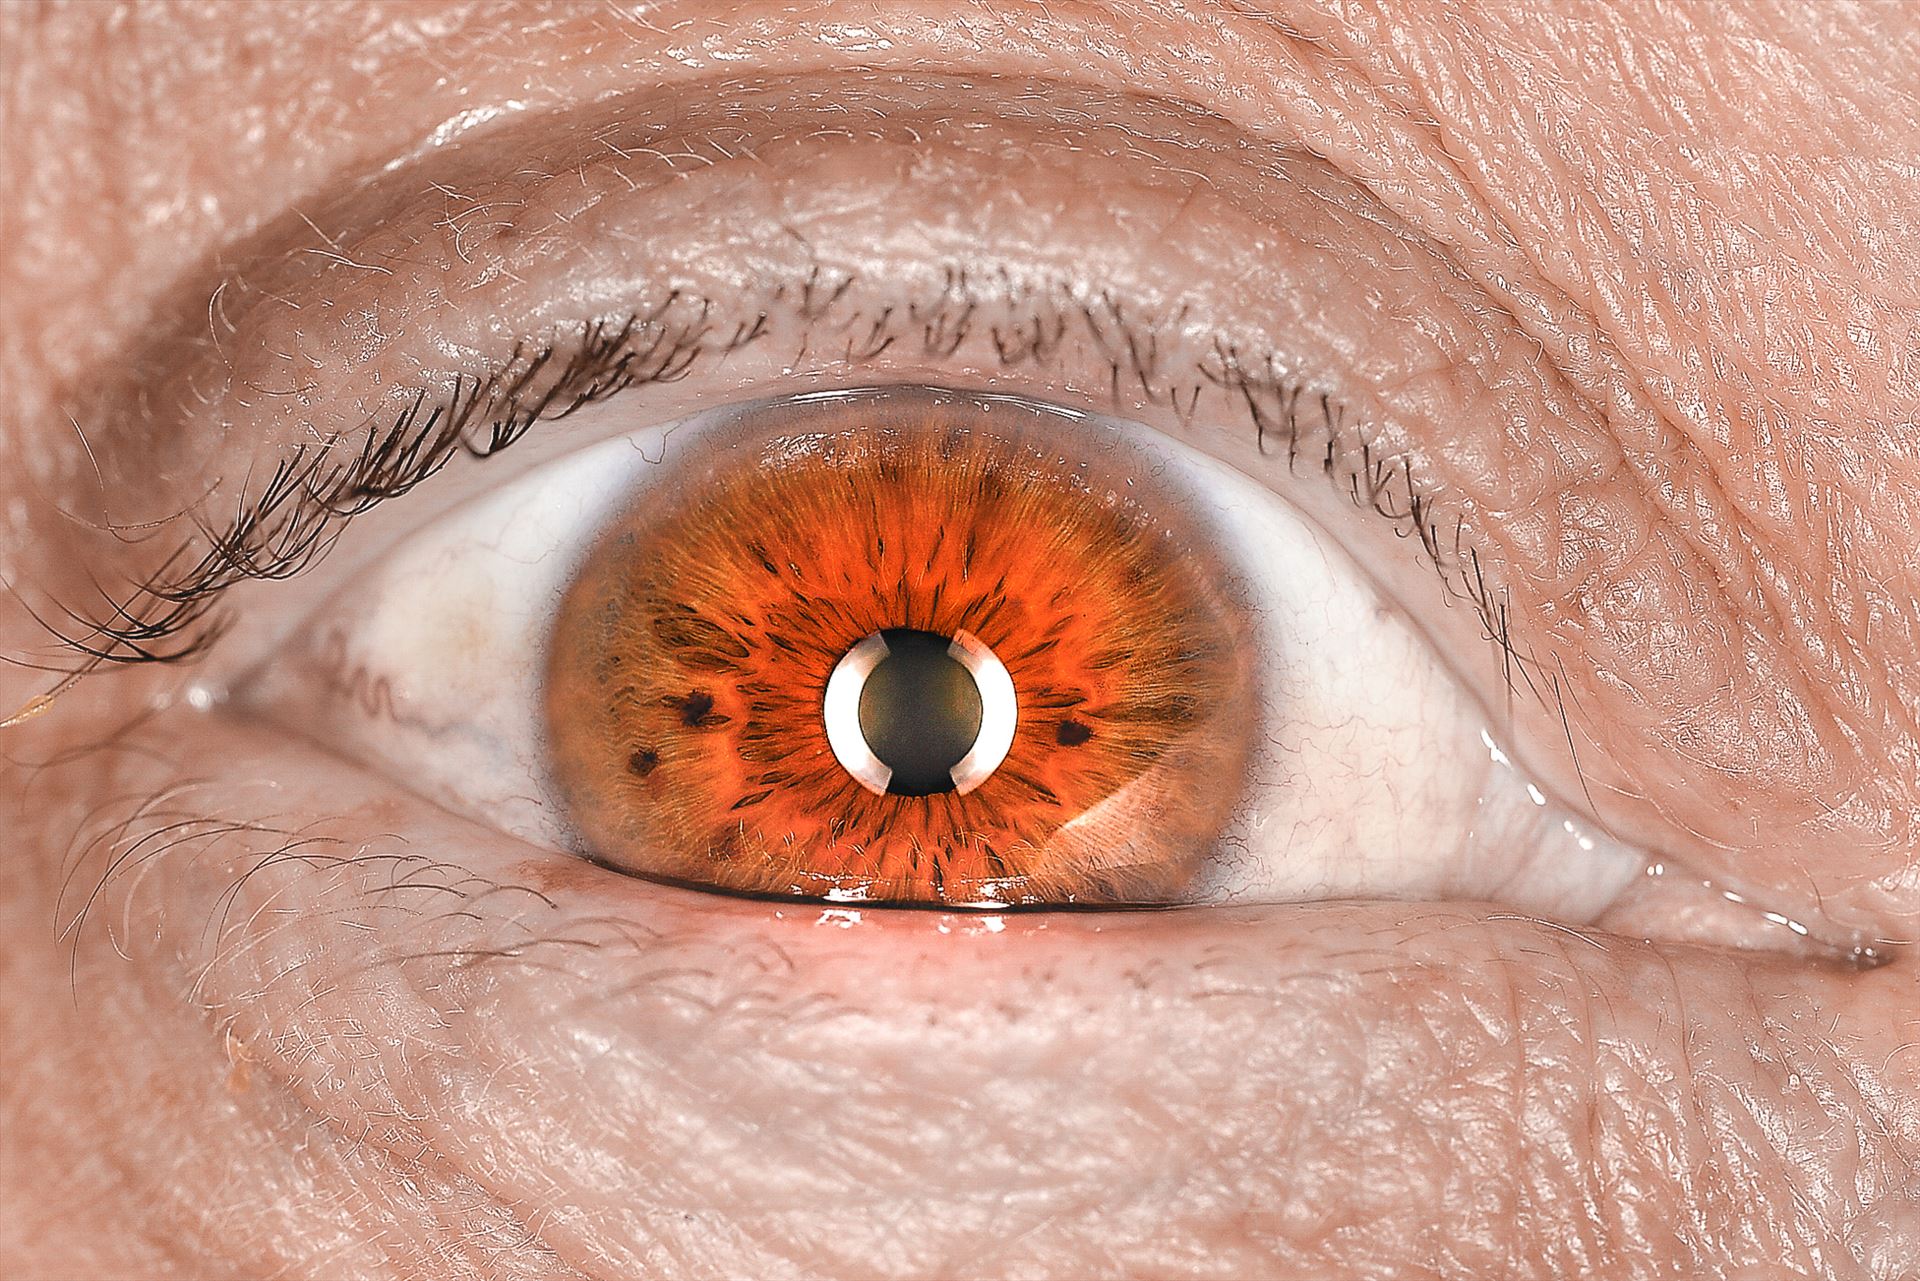 Detail - A close look into an eye by Jimages